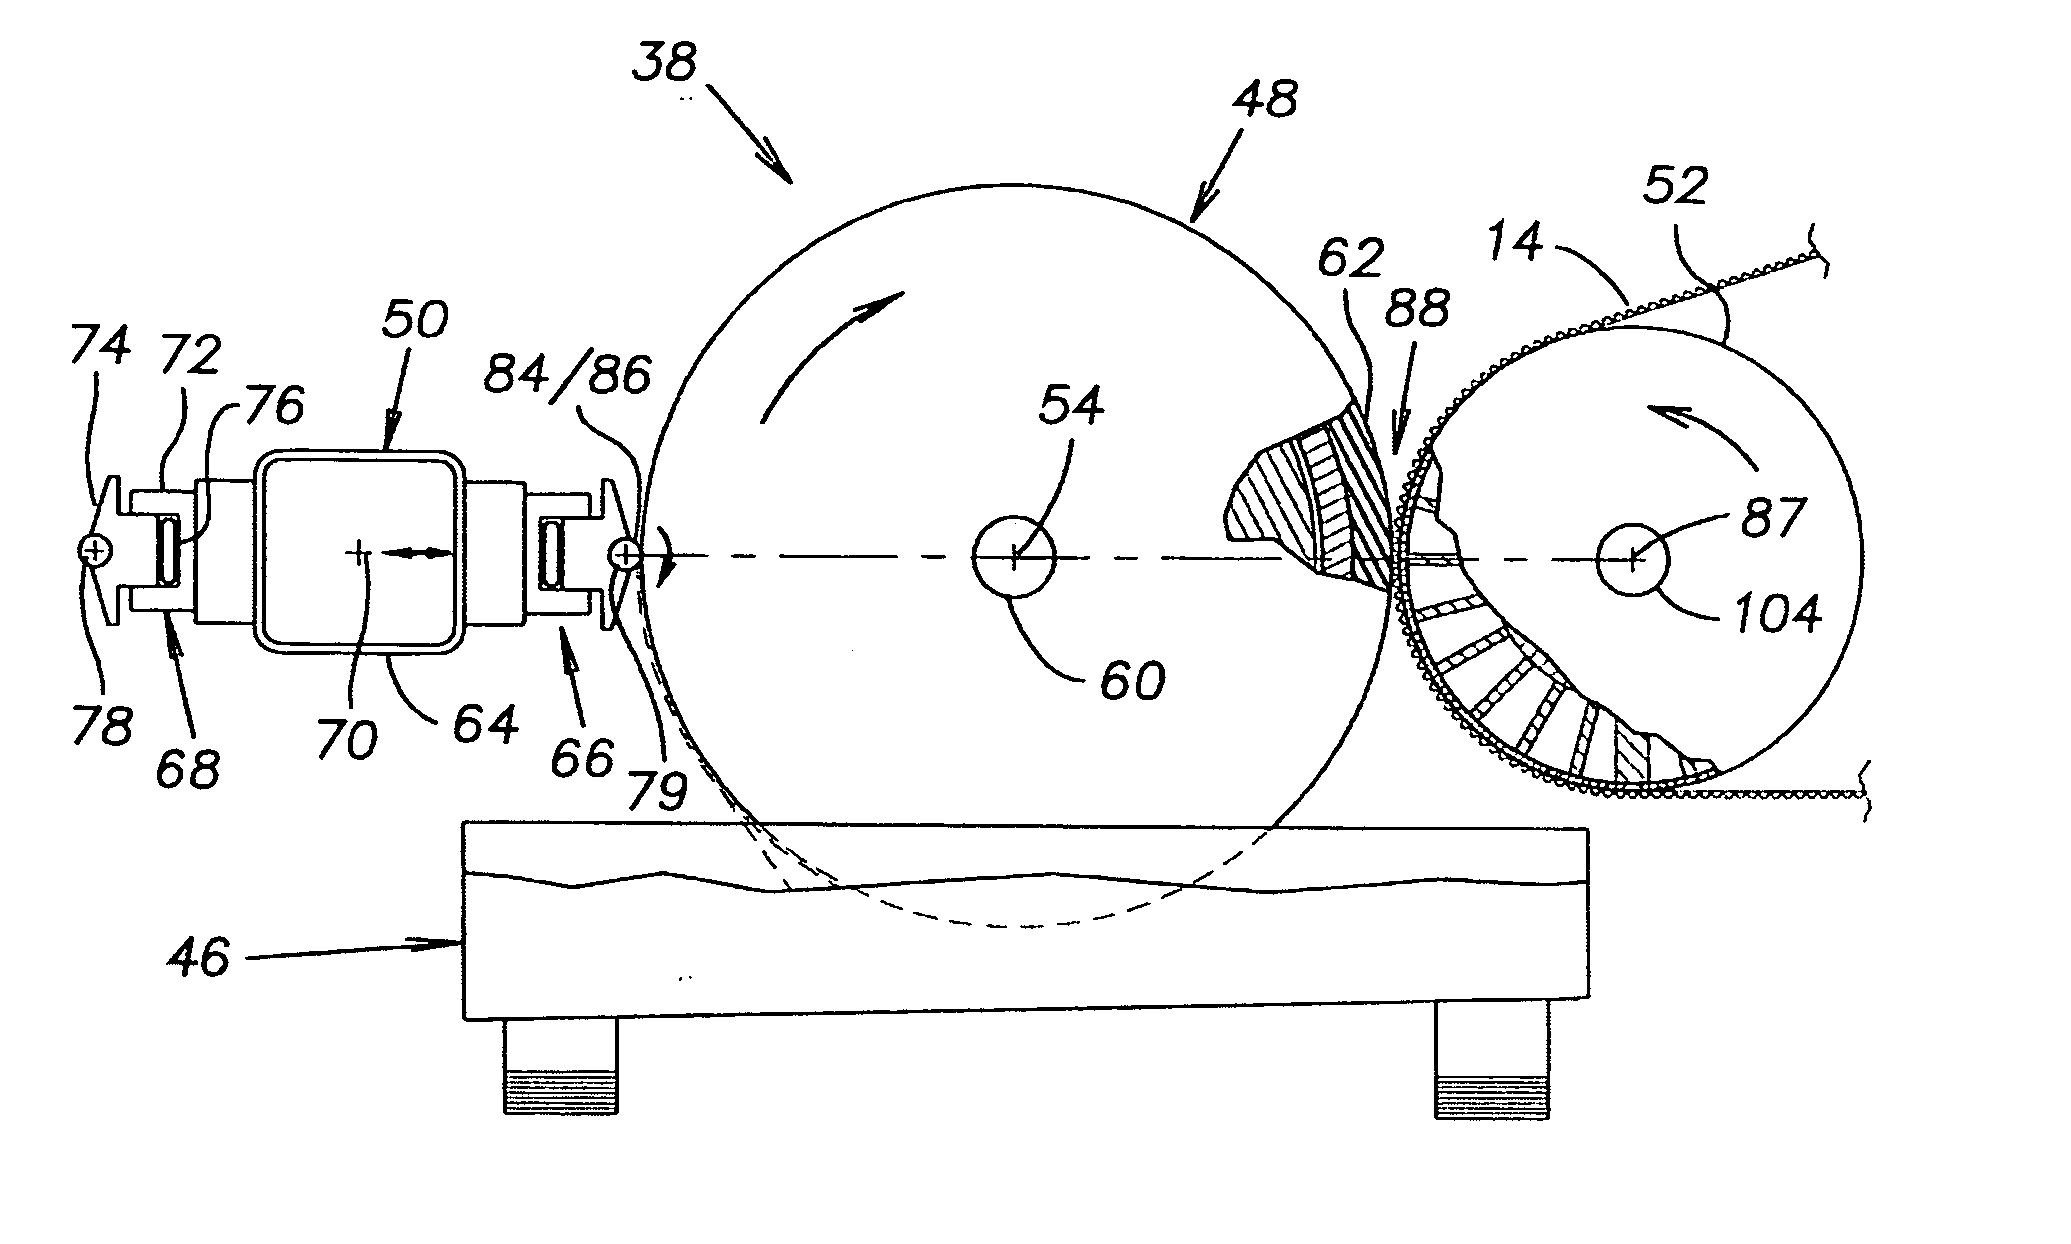 Method for producing corrugated cardboard